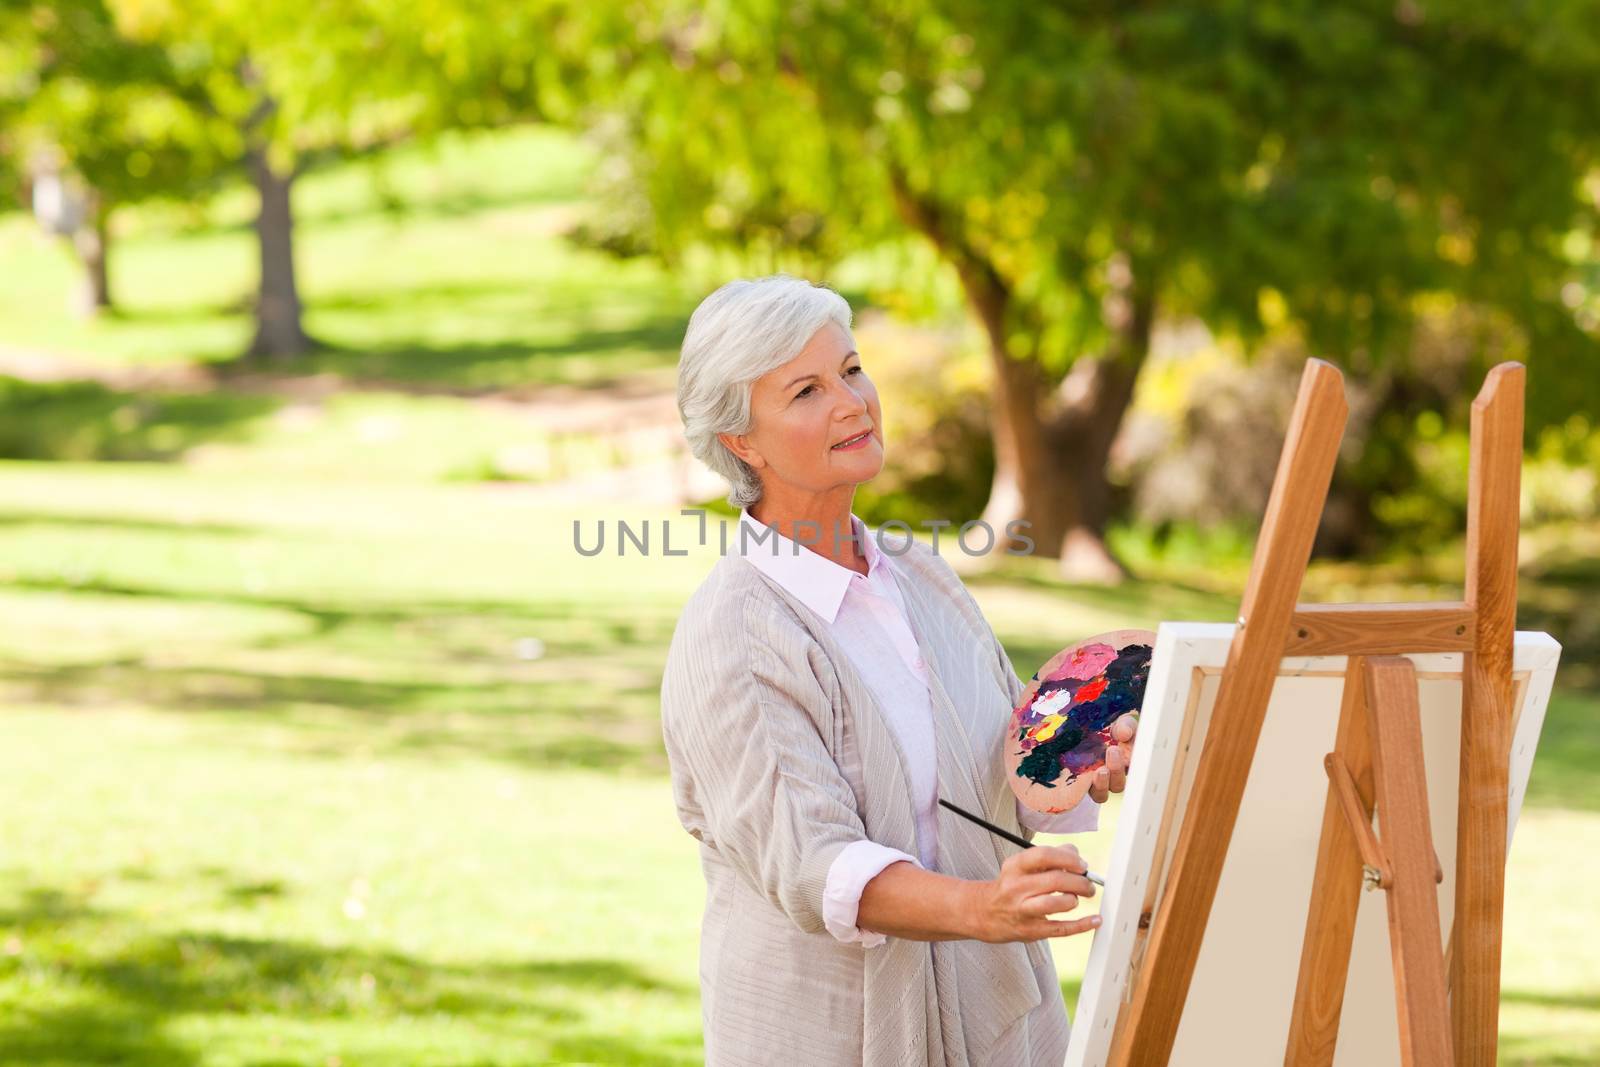 Senior woman painting in the park during the summer